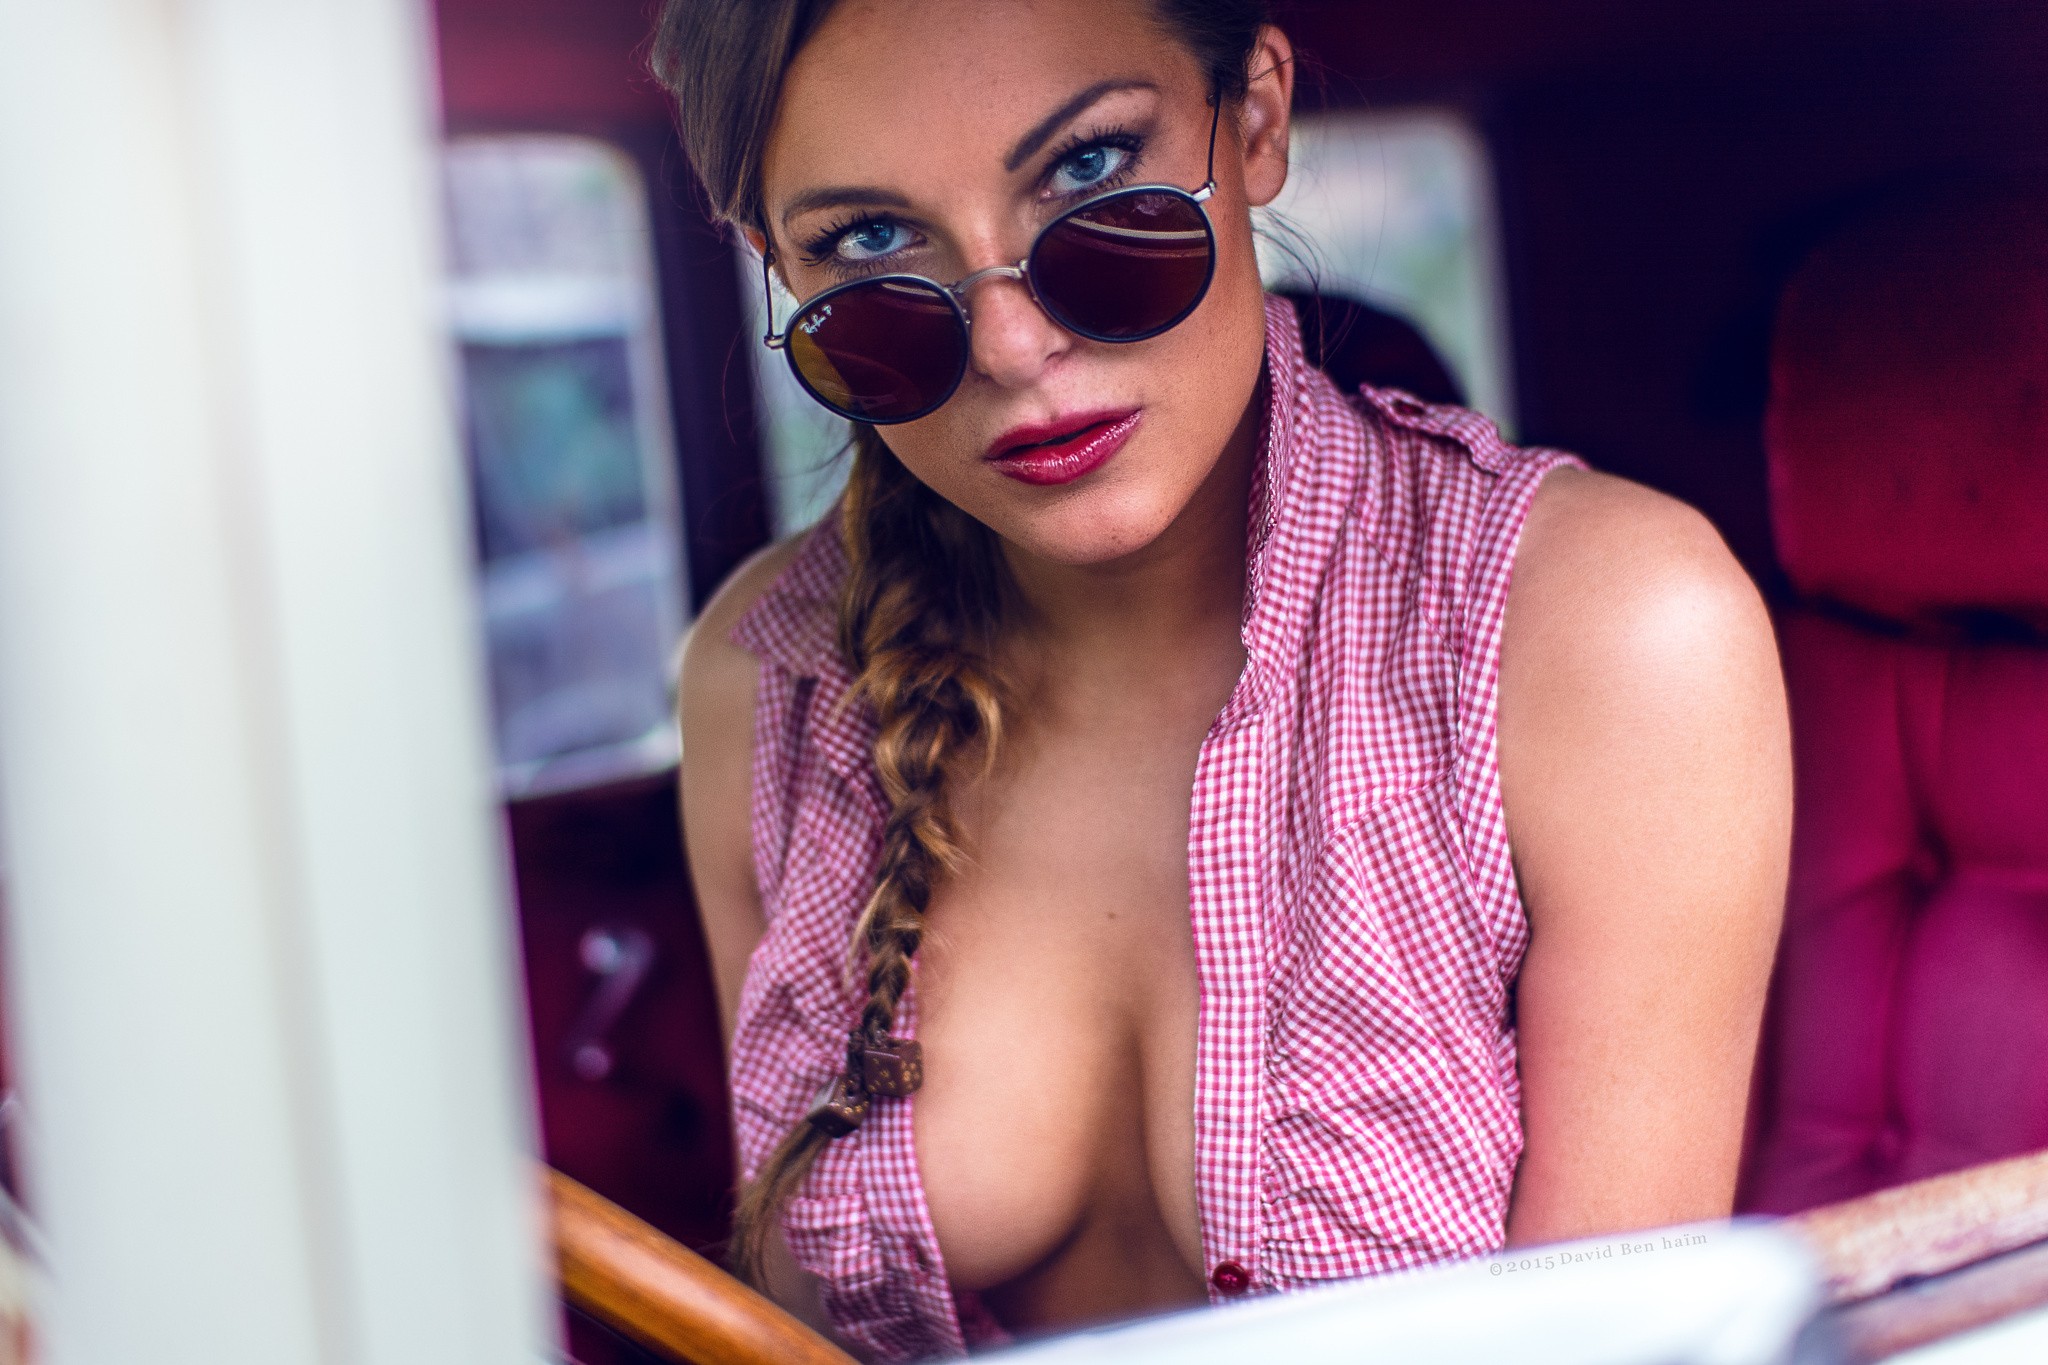 People 2048x1365 women model open shirt car face women with glasses blue eyes boobs looking at viewer David Ben Haim Clara Chelsy cleavage watermarked sunglasses women with shades makeup